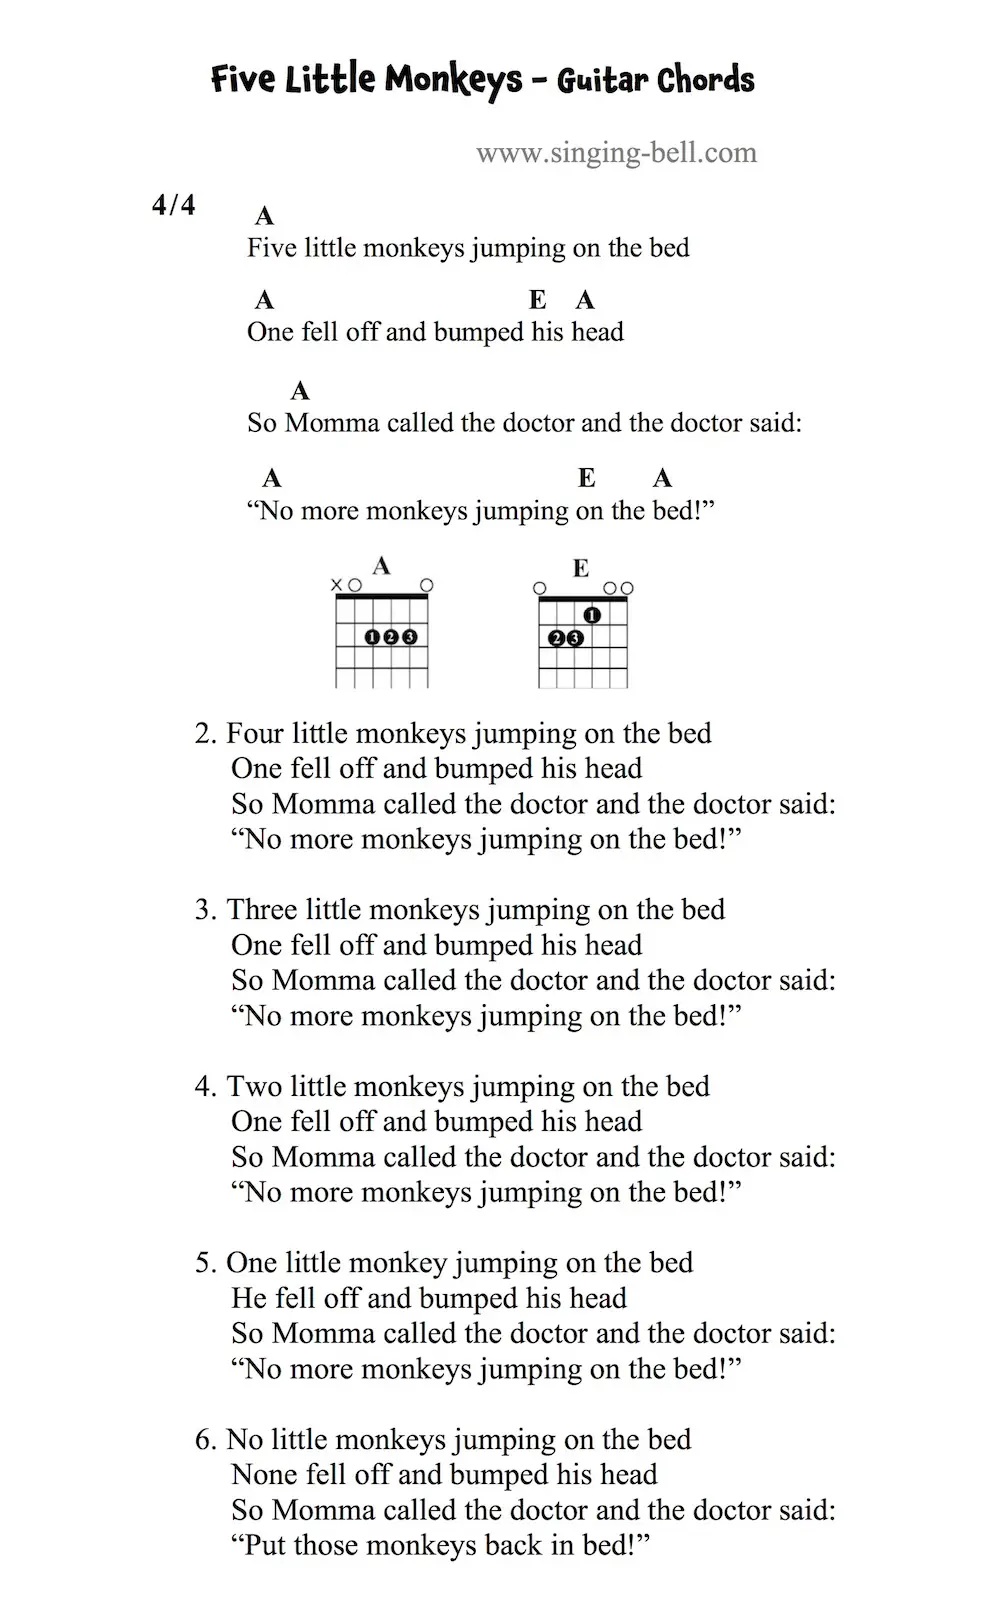 Five Little Monkeys Guitar Chords and Tabs.